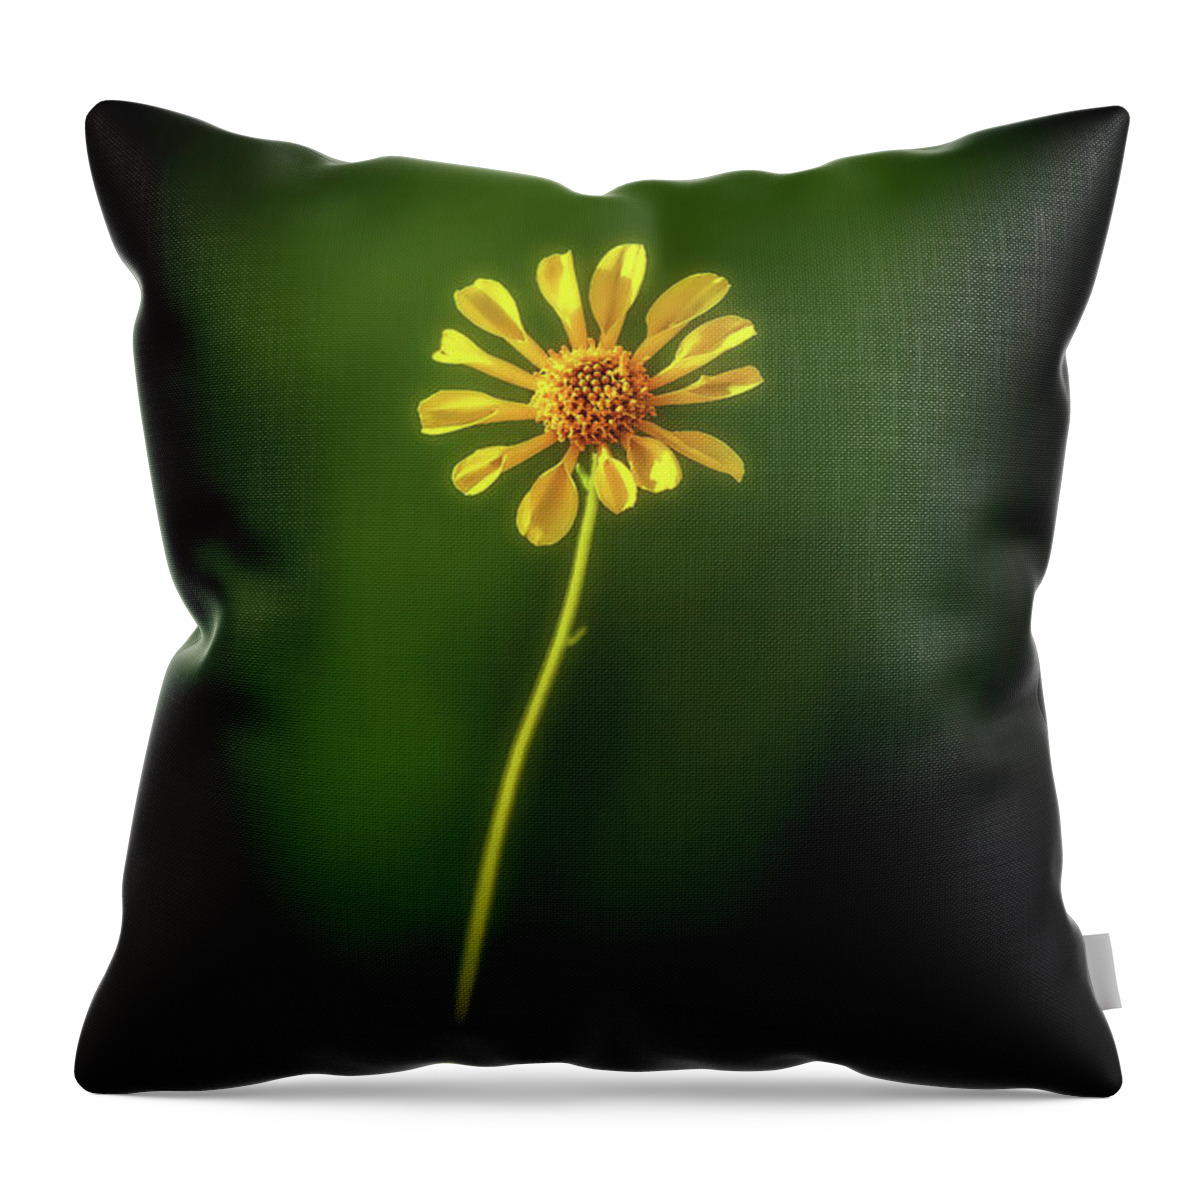 Business Decor Throw Pillow featuring the photograph Solo by Rick Furmanek